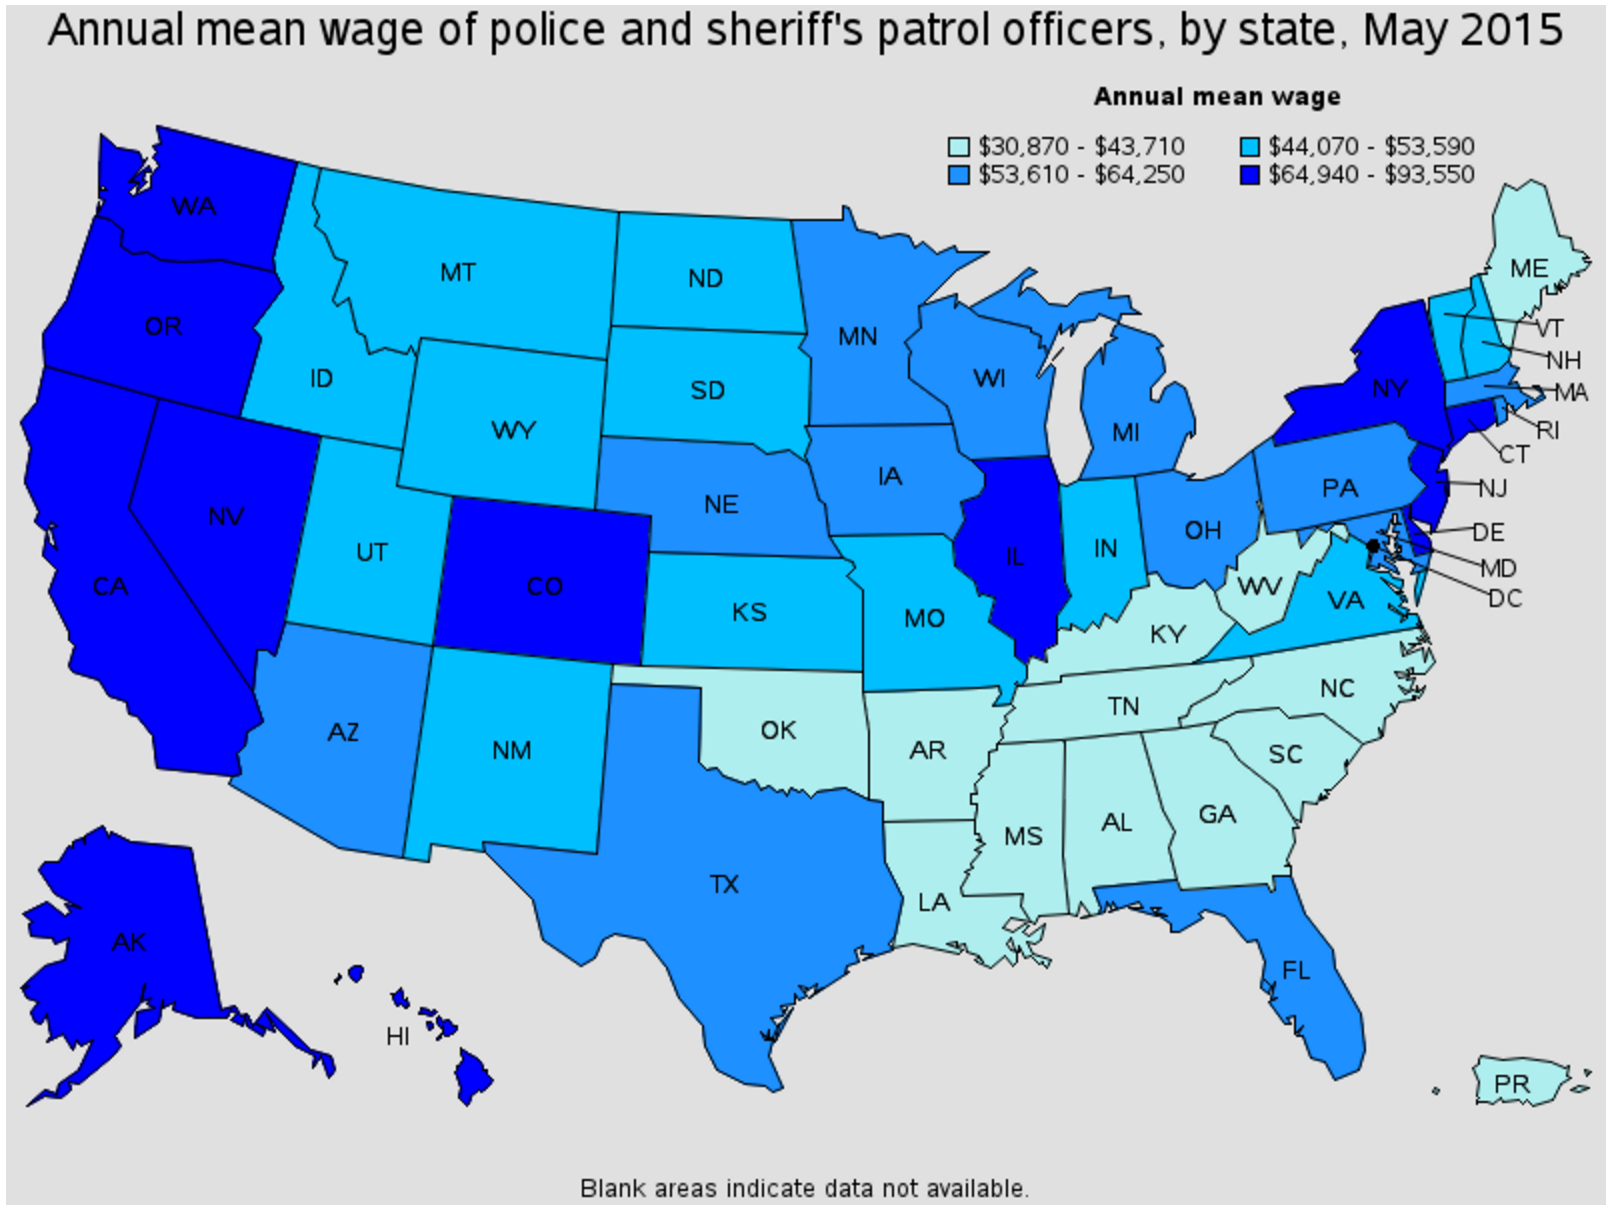 Mount Sterling police officer average salary by state